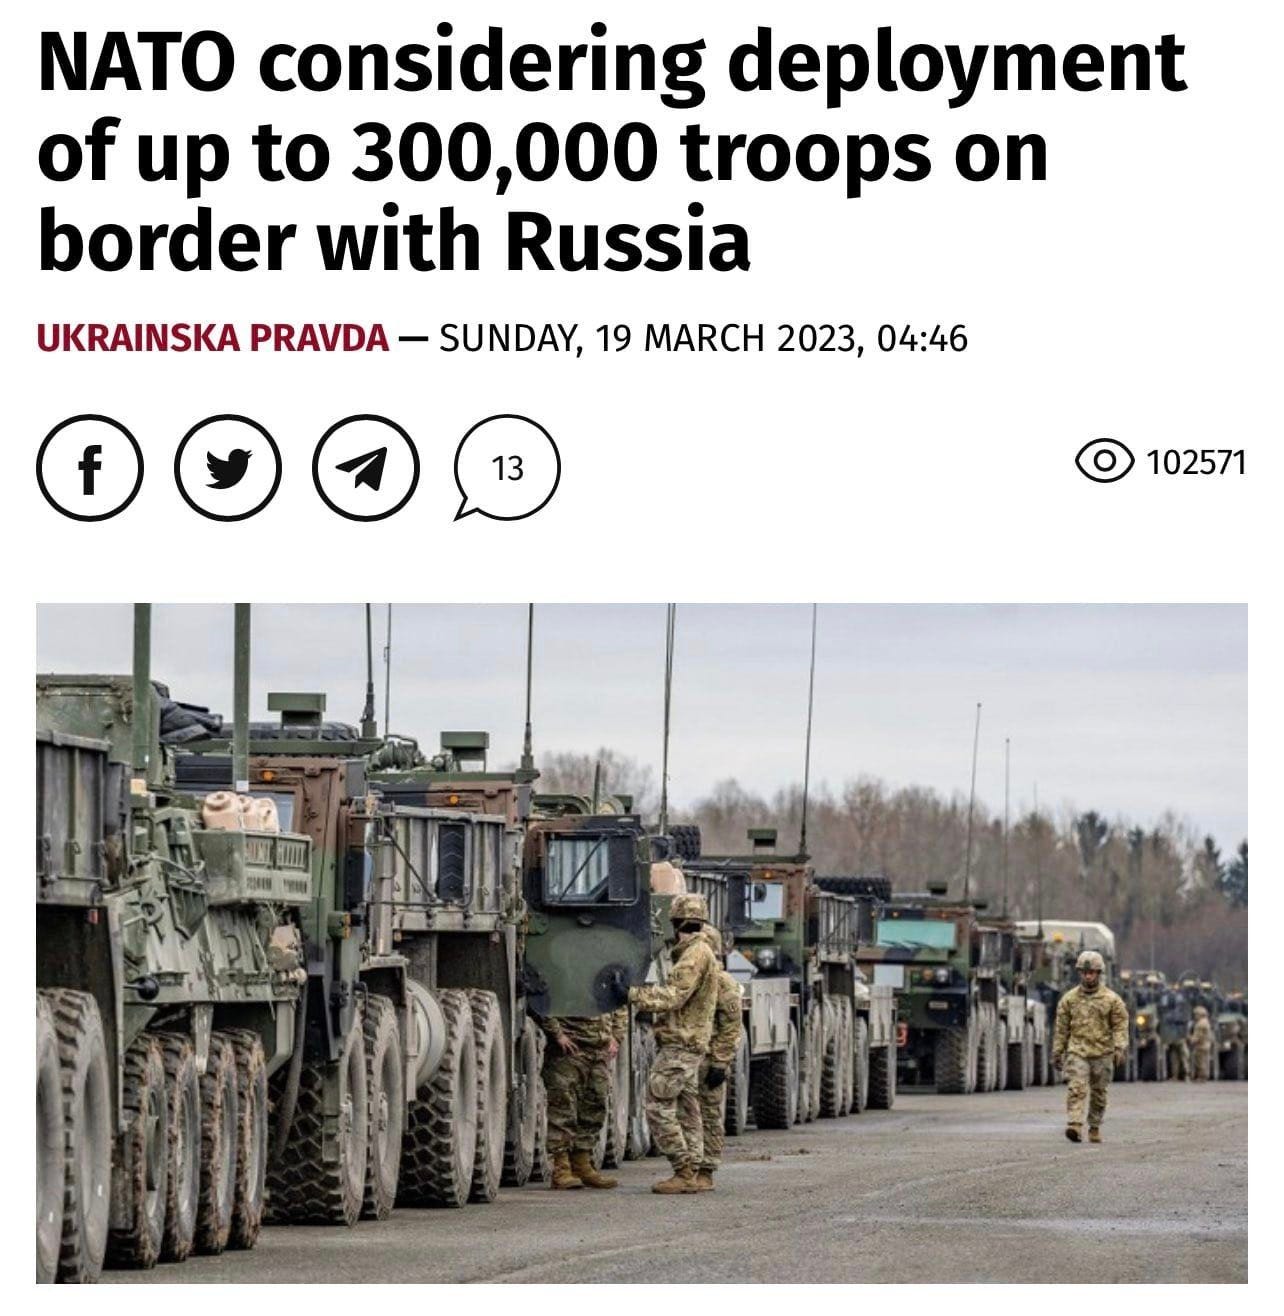 May be an image of 3 people, outdoors and text that says 'NATO considering deployment of up to 300,000 troops on border with Russia UKRAINSKA PRAVDA- -SUNDAY, 19 MARCH 2023, 04:46 f 13 102571'